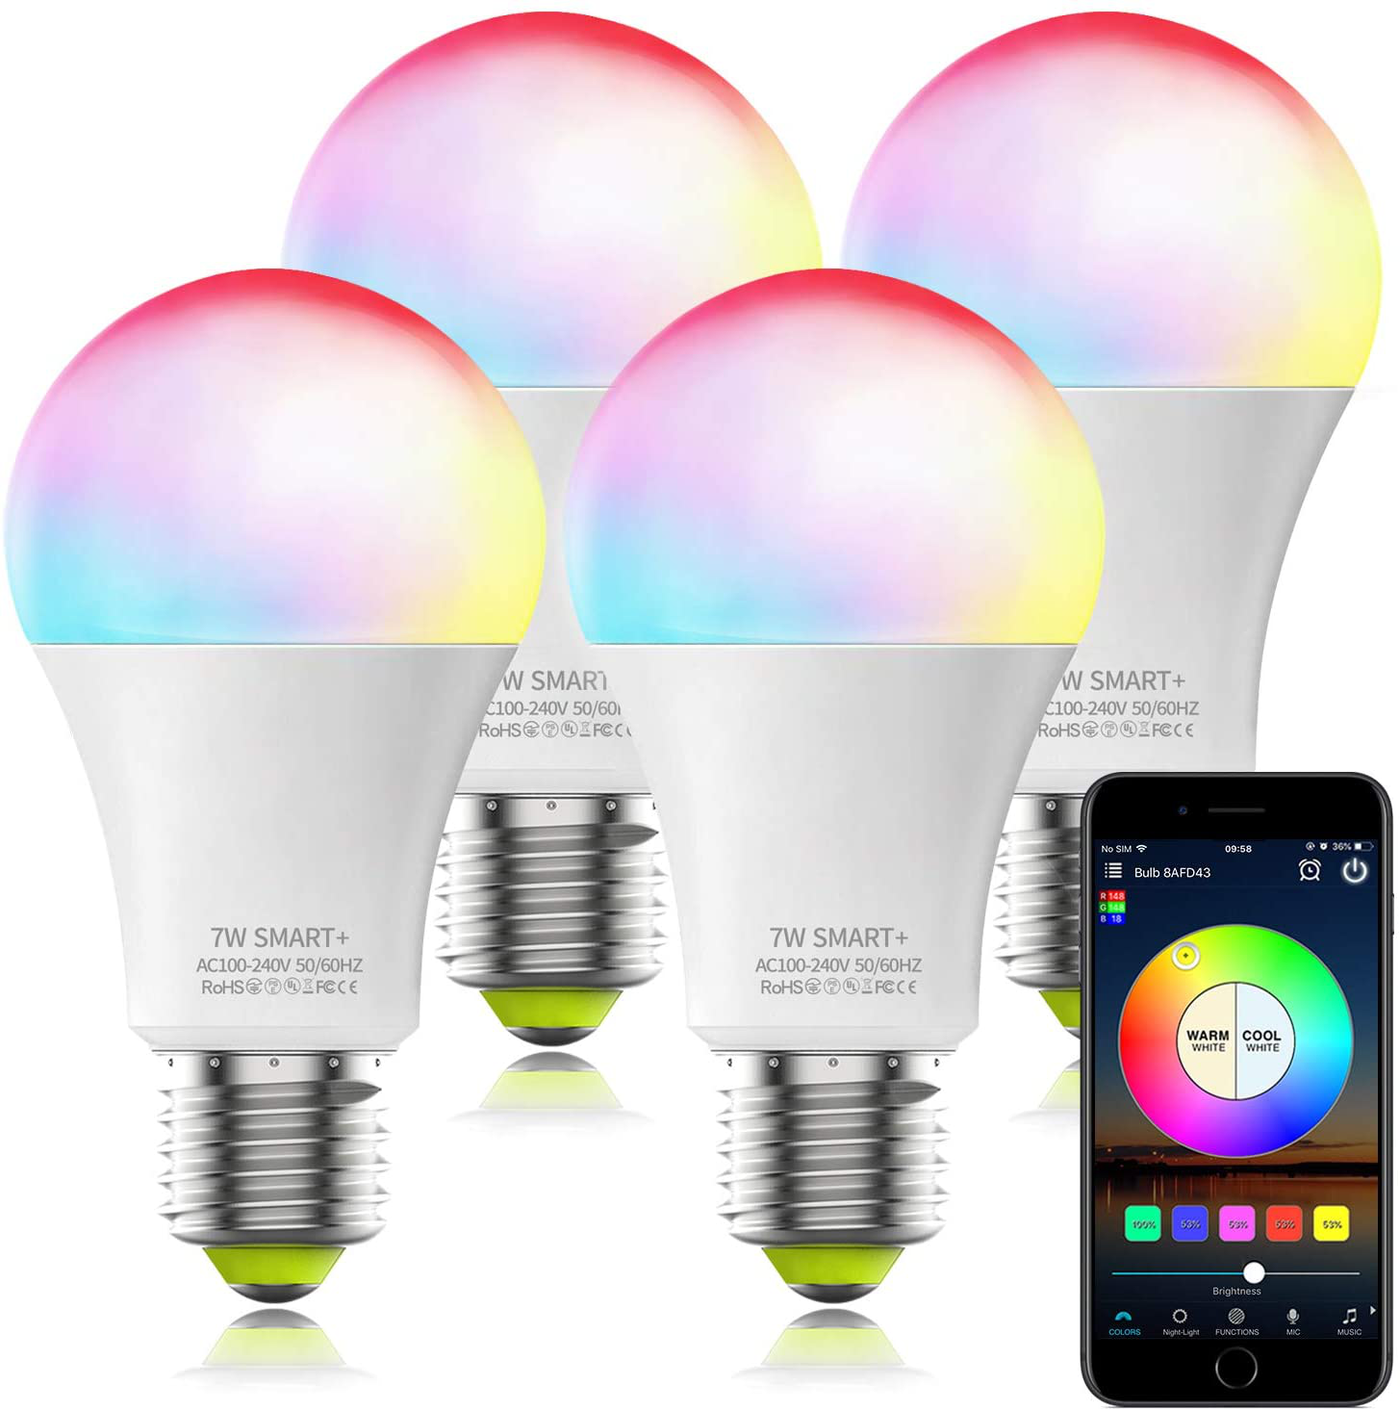 WiFi Smart Light Bulb, A19 E26 60W Equivalent Tunable White Color Changing Smart LED Light Bulb, UL Certified, Works with Alexa Google Home, No Hub Required